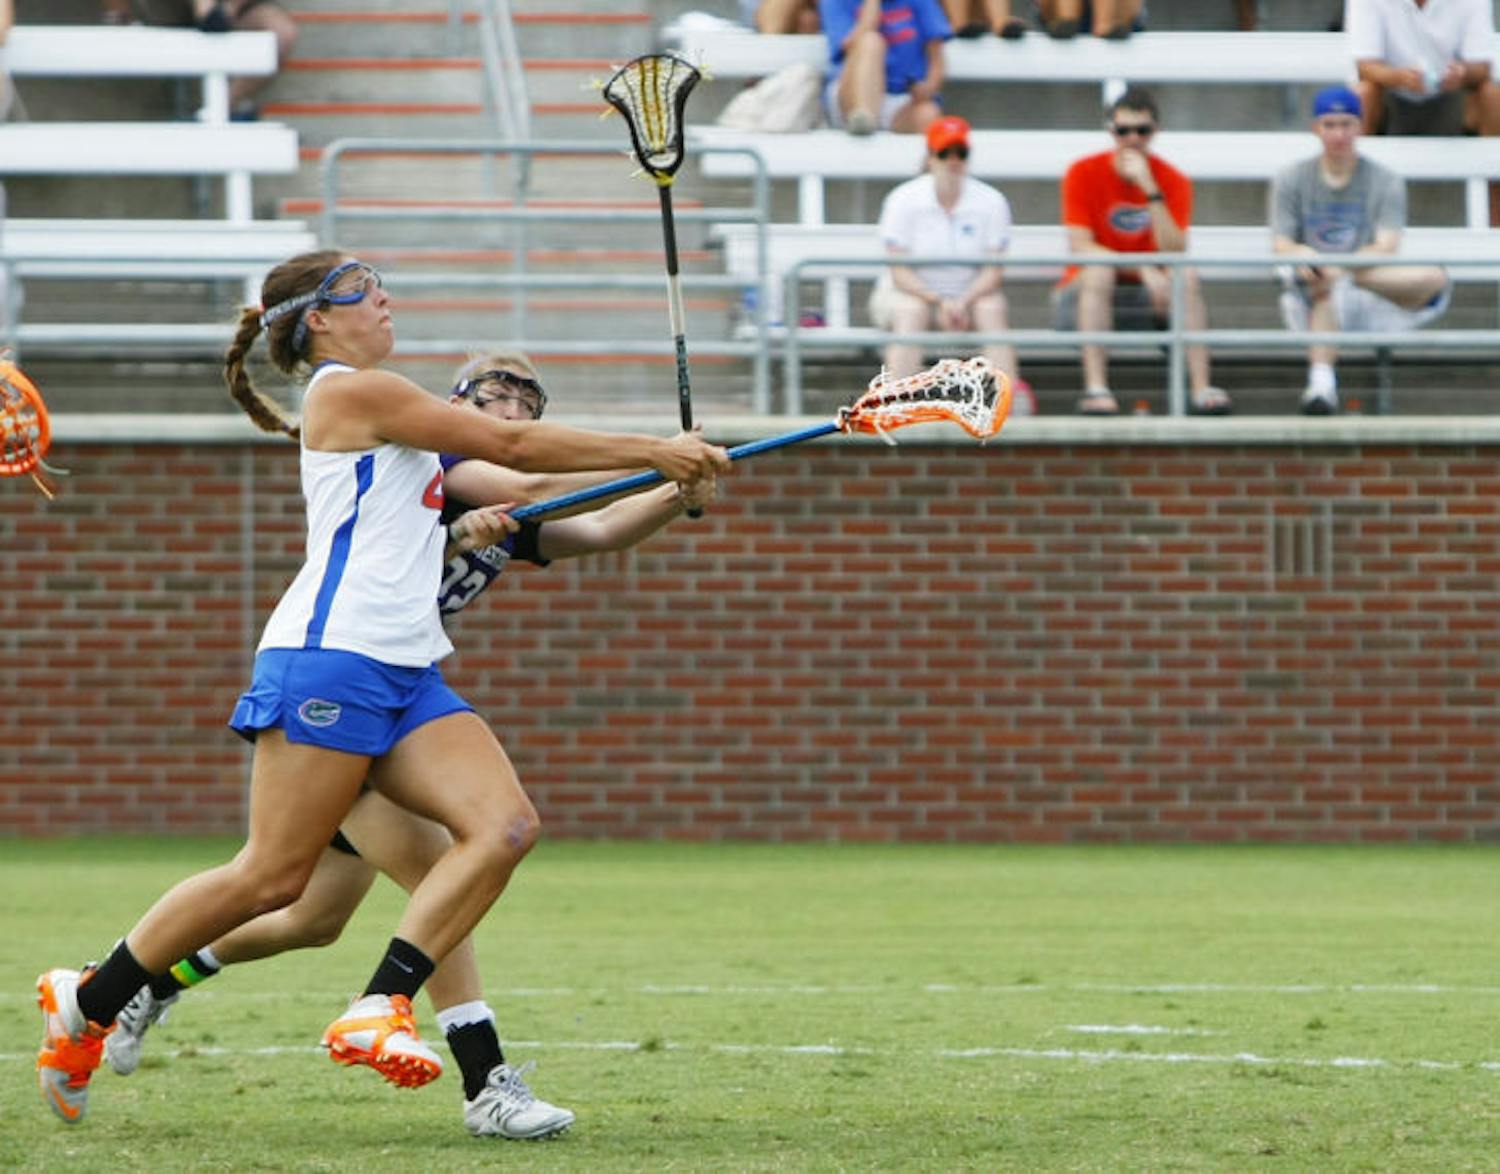 Senior Kitty Cullen attempts a shot during Florida’s 14-7 win against Northwestern in the ALC Championship Game on May 5, 2012, at Dizney Stadium. Cullen said teammate Ashley Bruns could beat any defender when Bruns attacks from the crease.